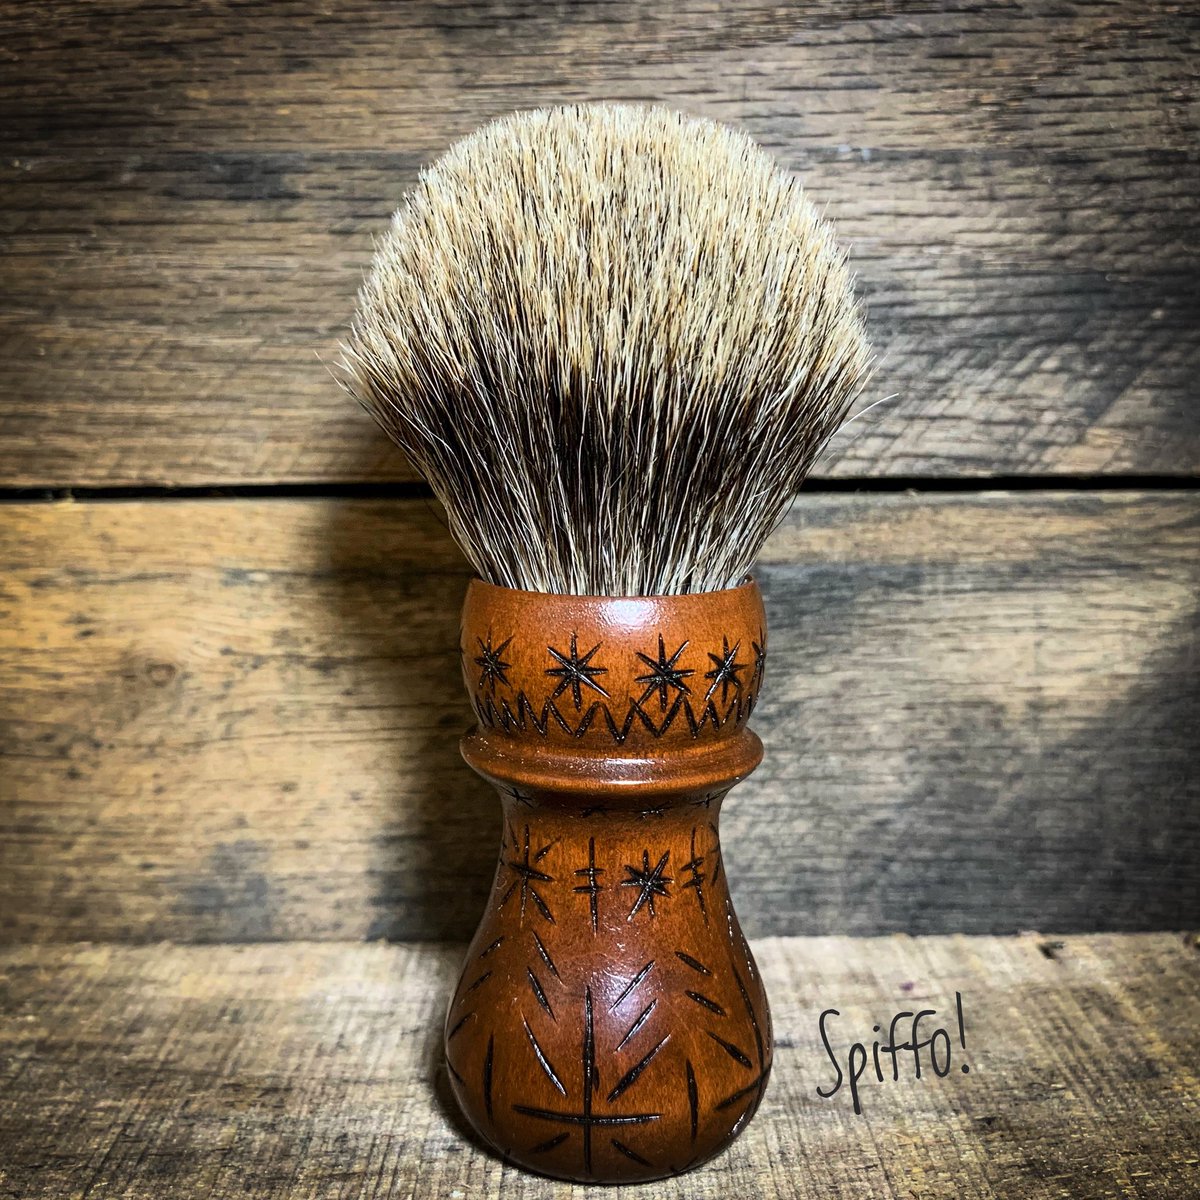 The random incised design of the stained solid Maple handle and the 24mm Best badger knot of Moses creates a totally unique shaving brush! 😎 #wetshaving #shaving #spiffo #shavingbrushes #shavingbrush #spiffoman #novascotia #halifax #shaveoftheday #mensgrooming #dartmouth